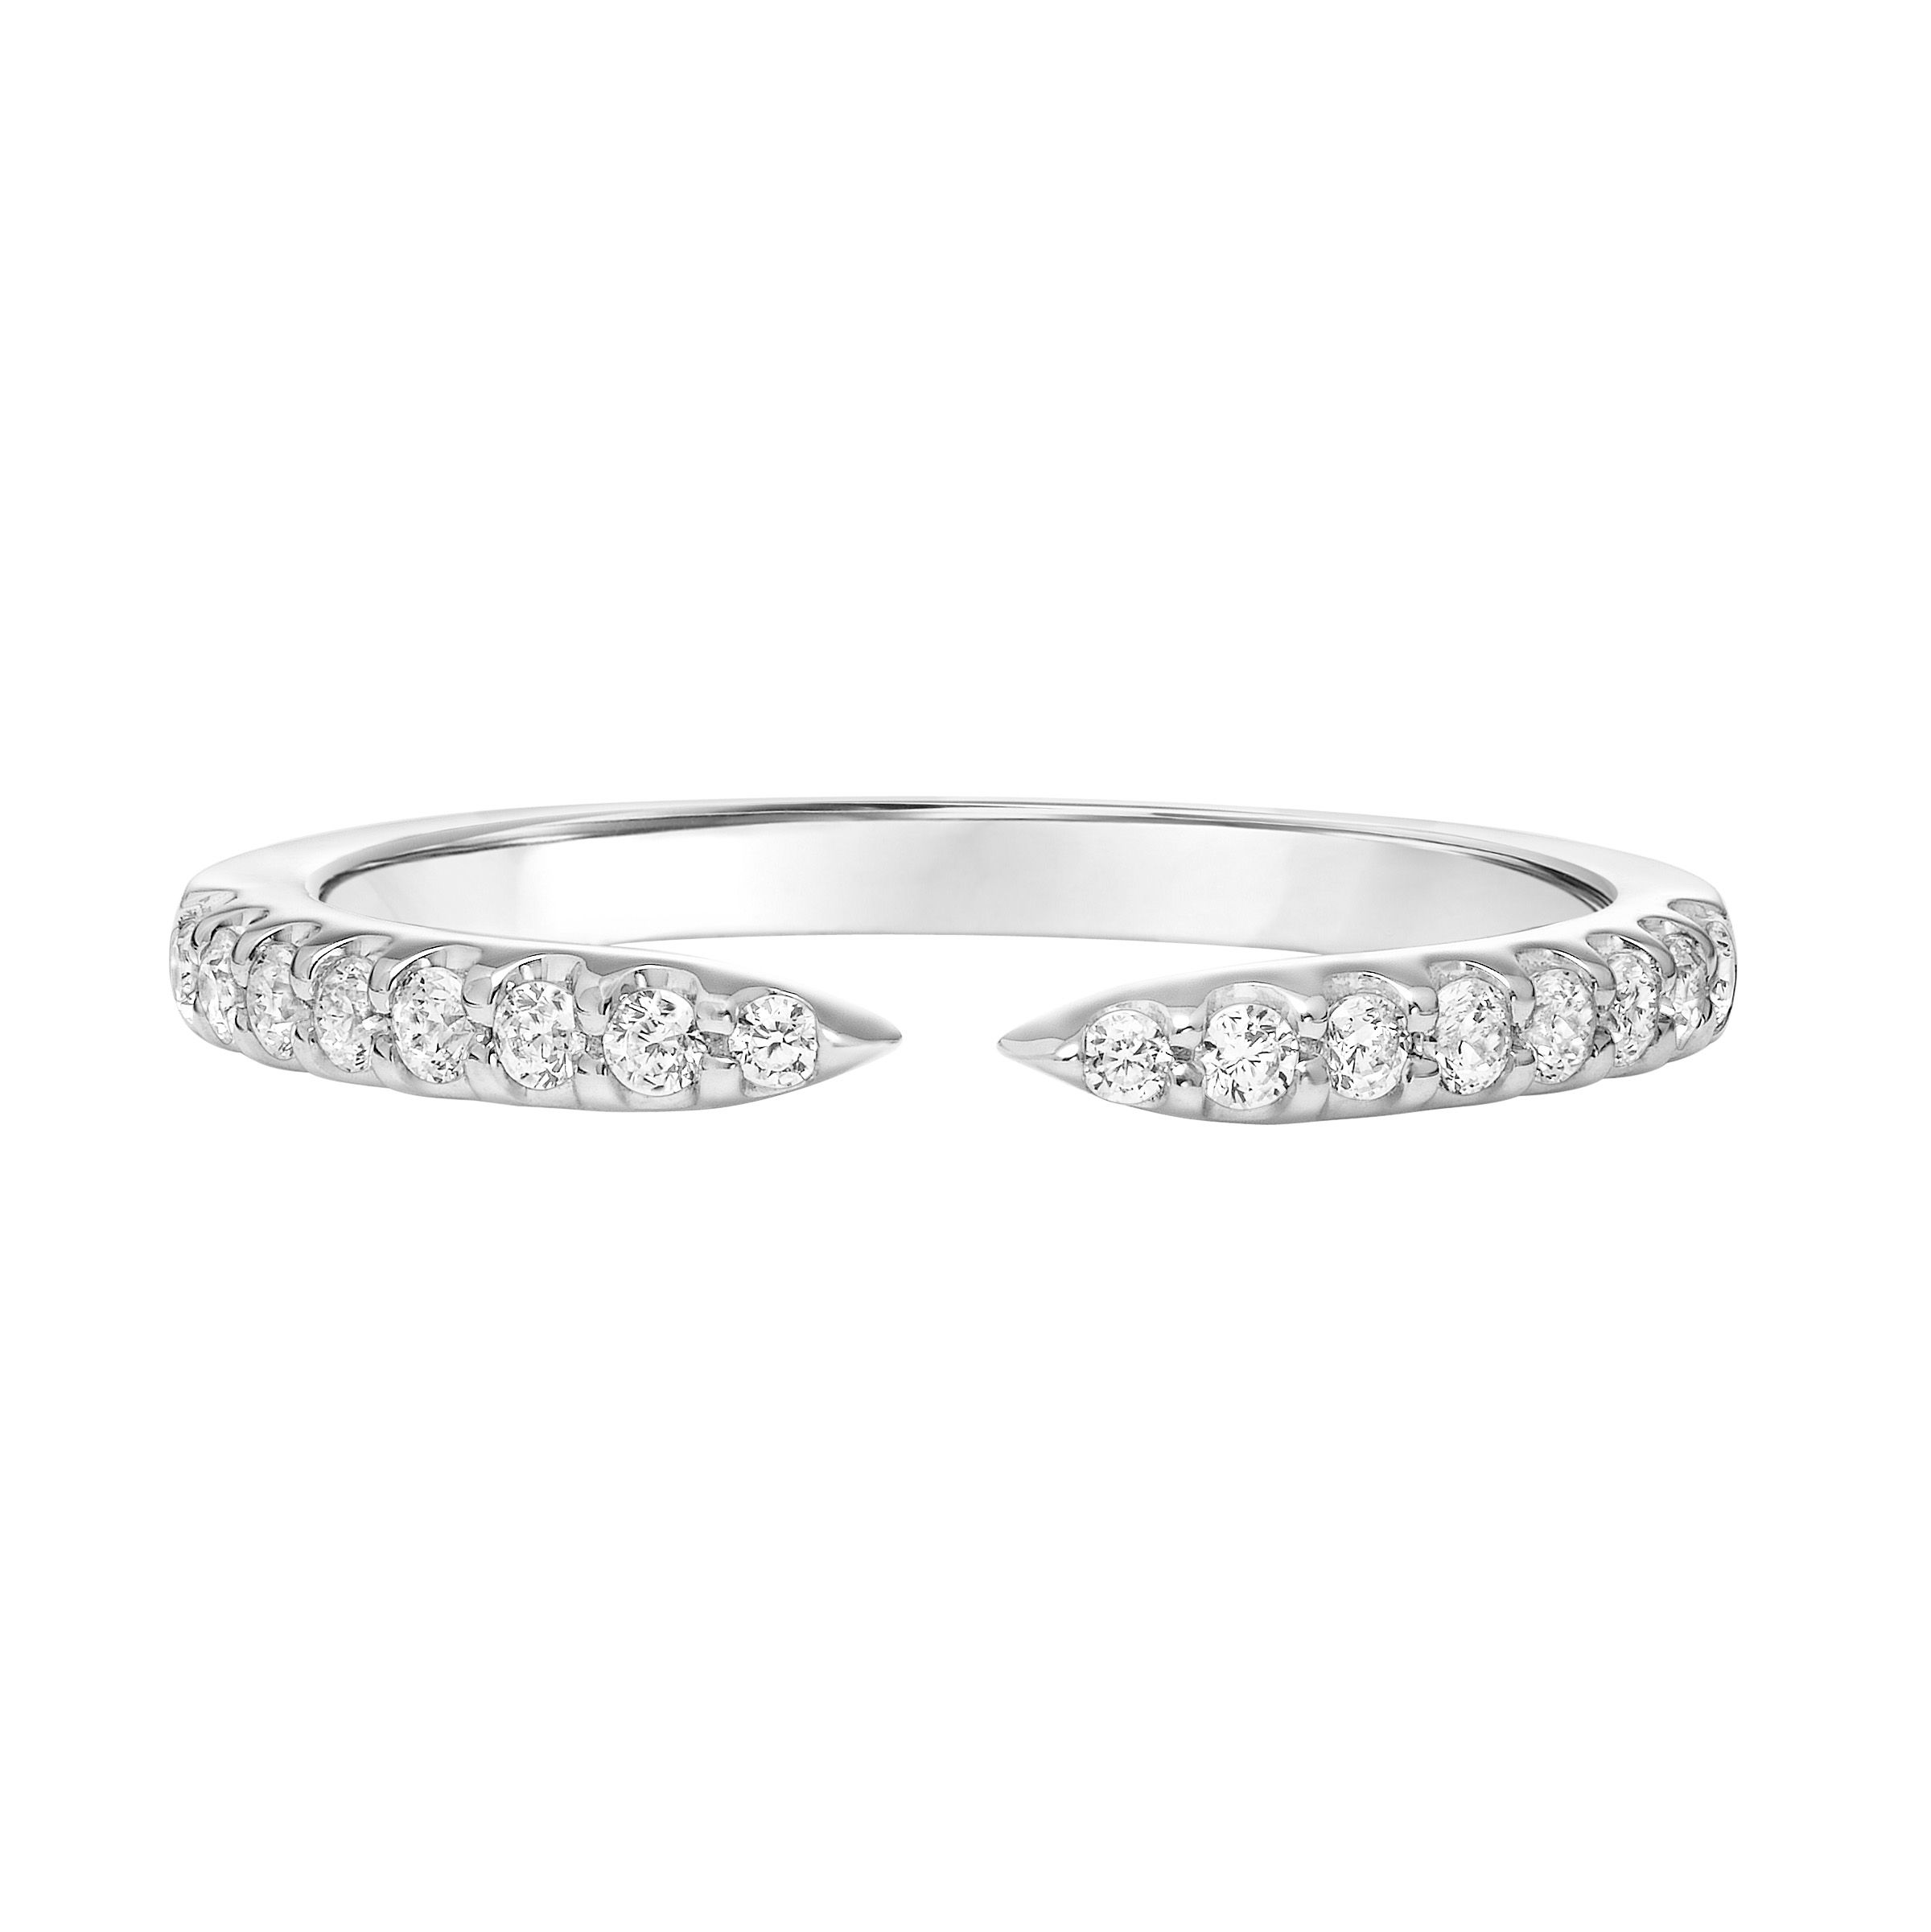 This ring by Goldman is crafted from 14k white gold and features 0.19 total carats of diamonds.